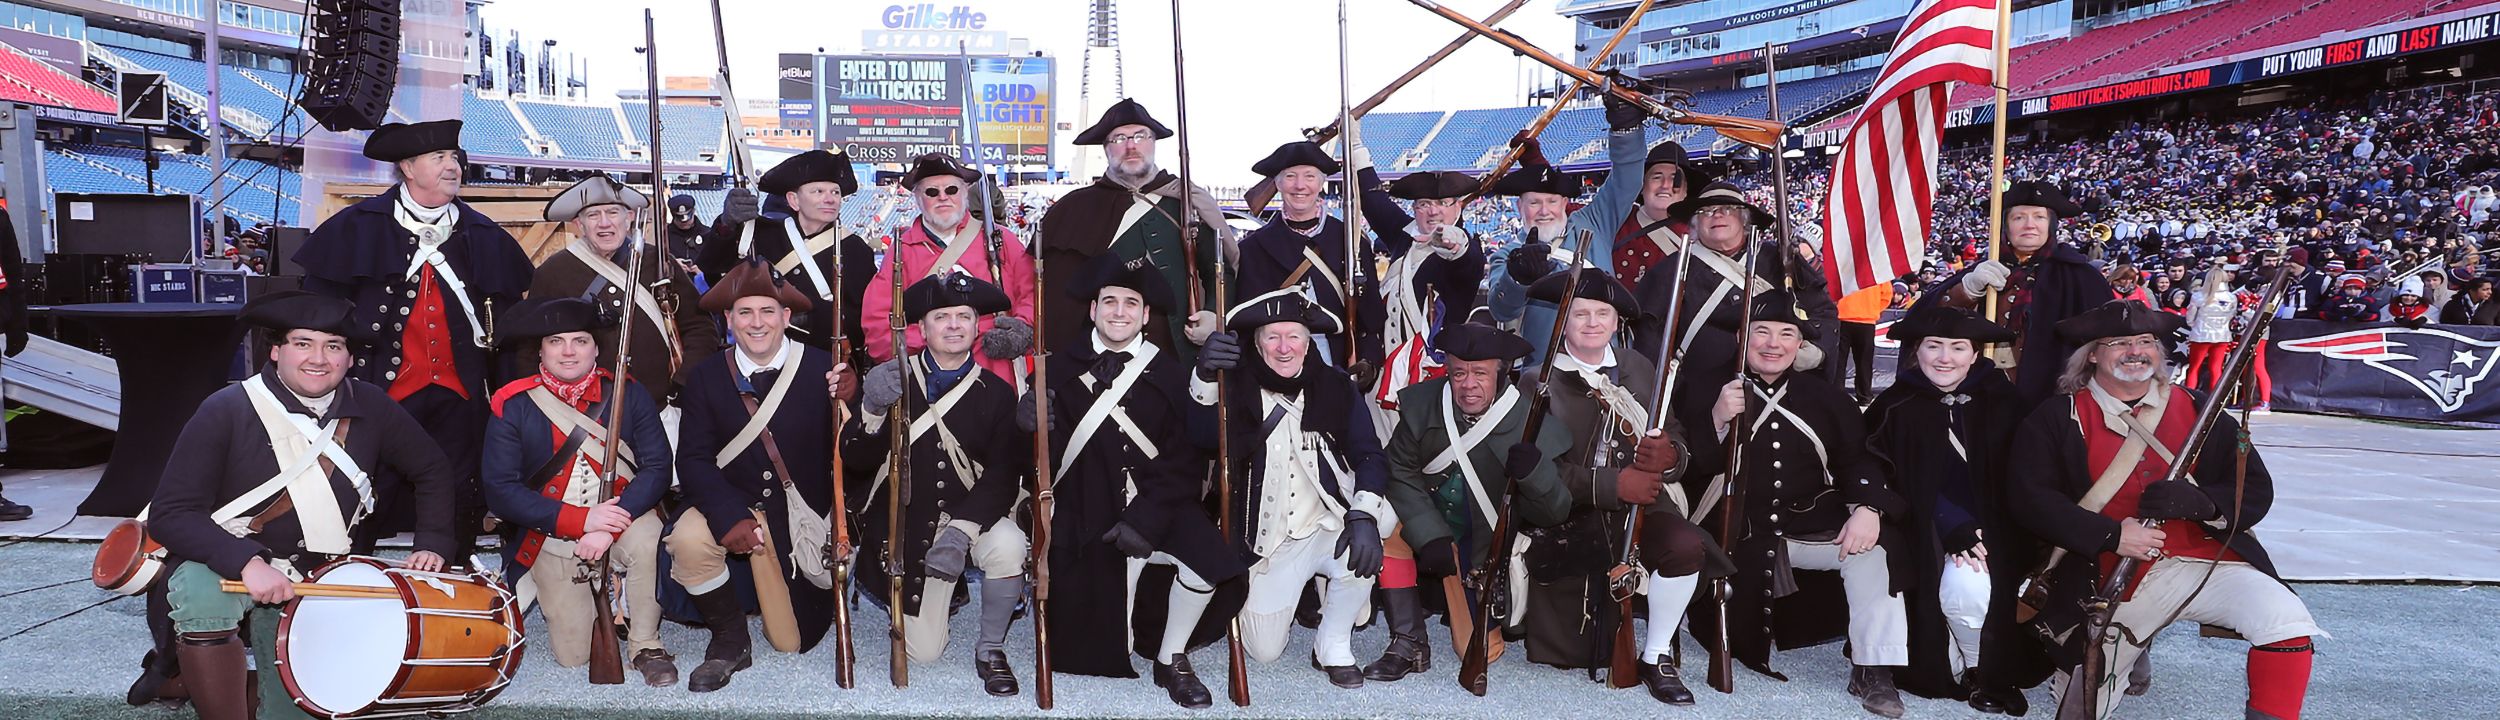 115 New England Patriots End Zone Militia Photos & High Res Pictures -  Getty Images